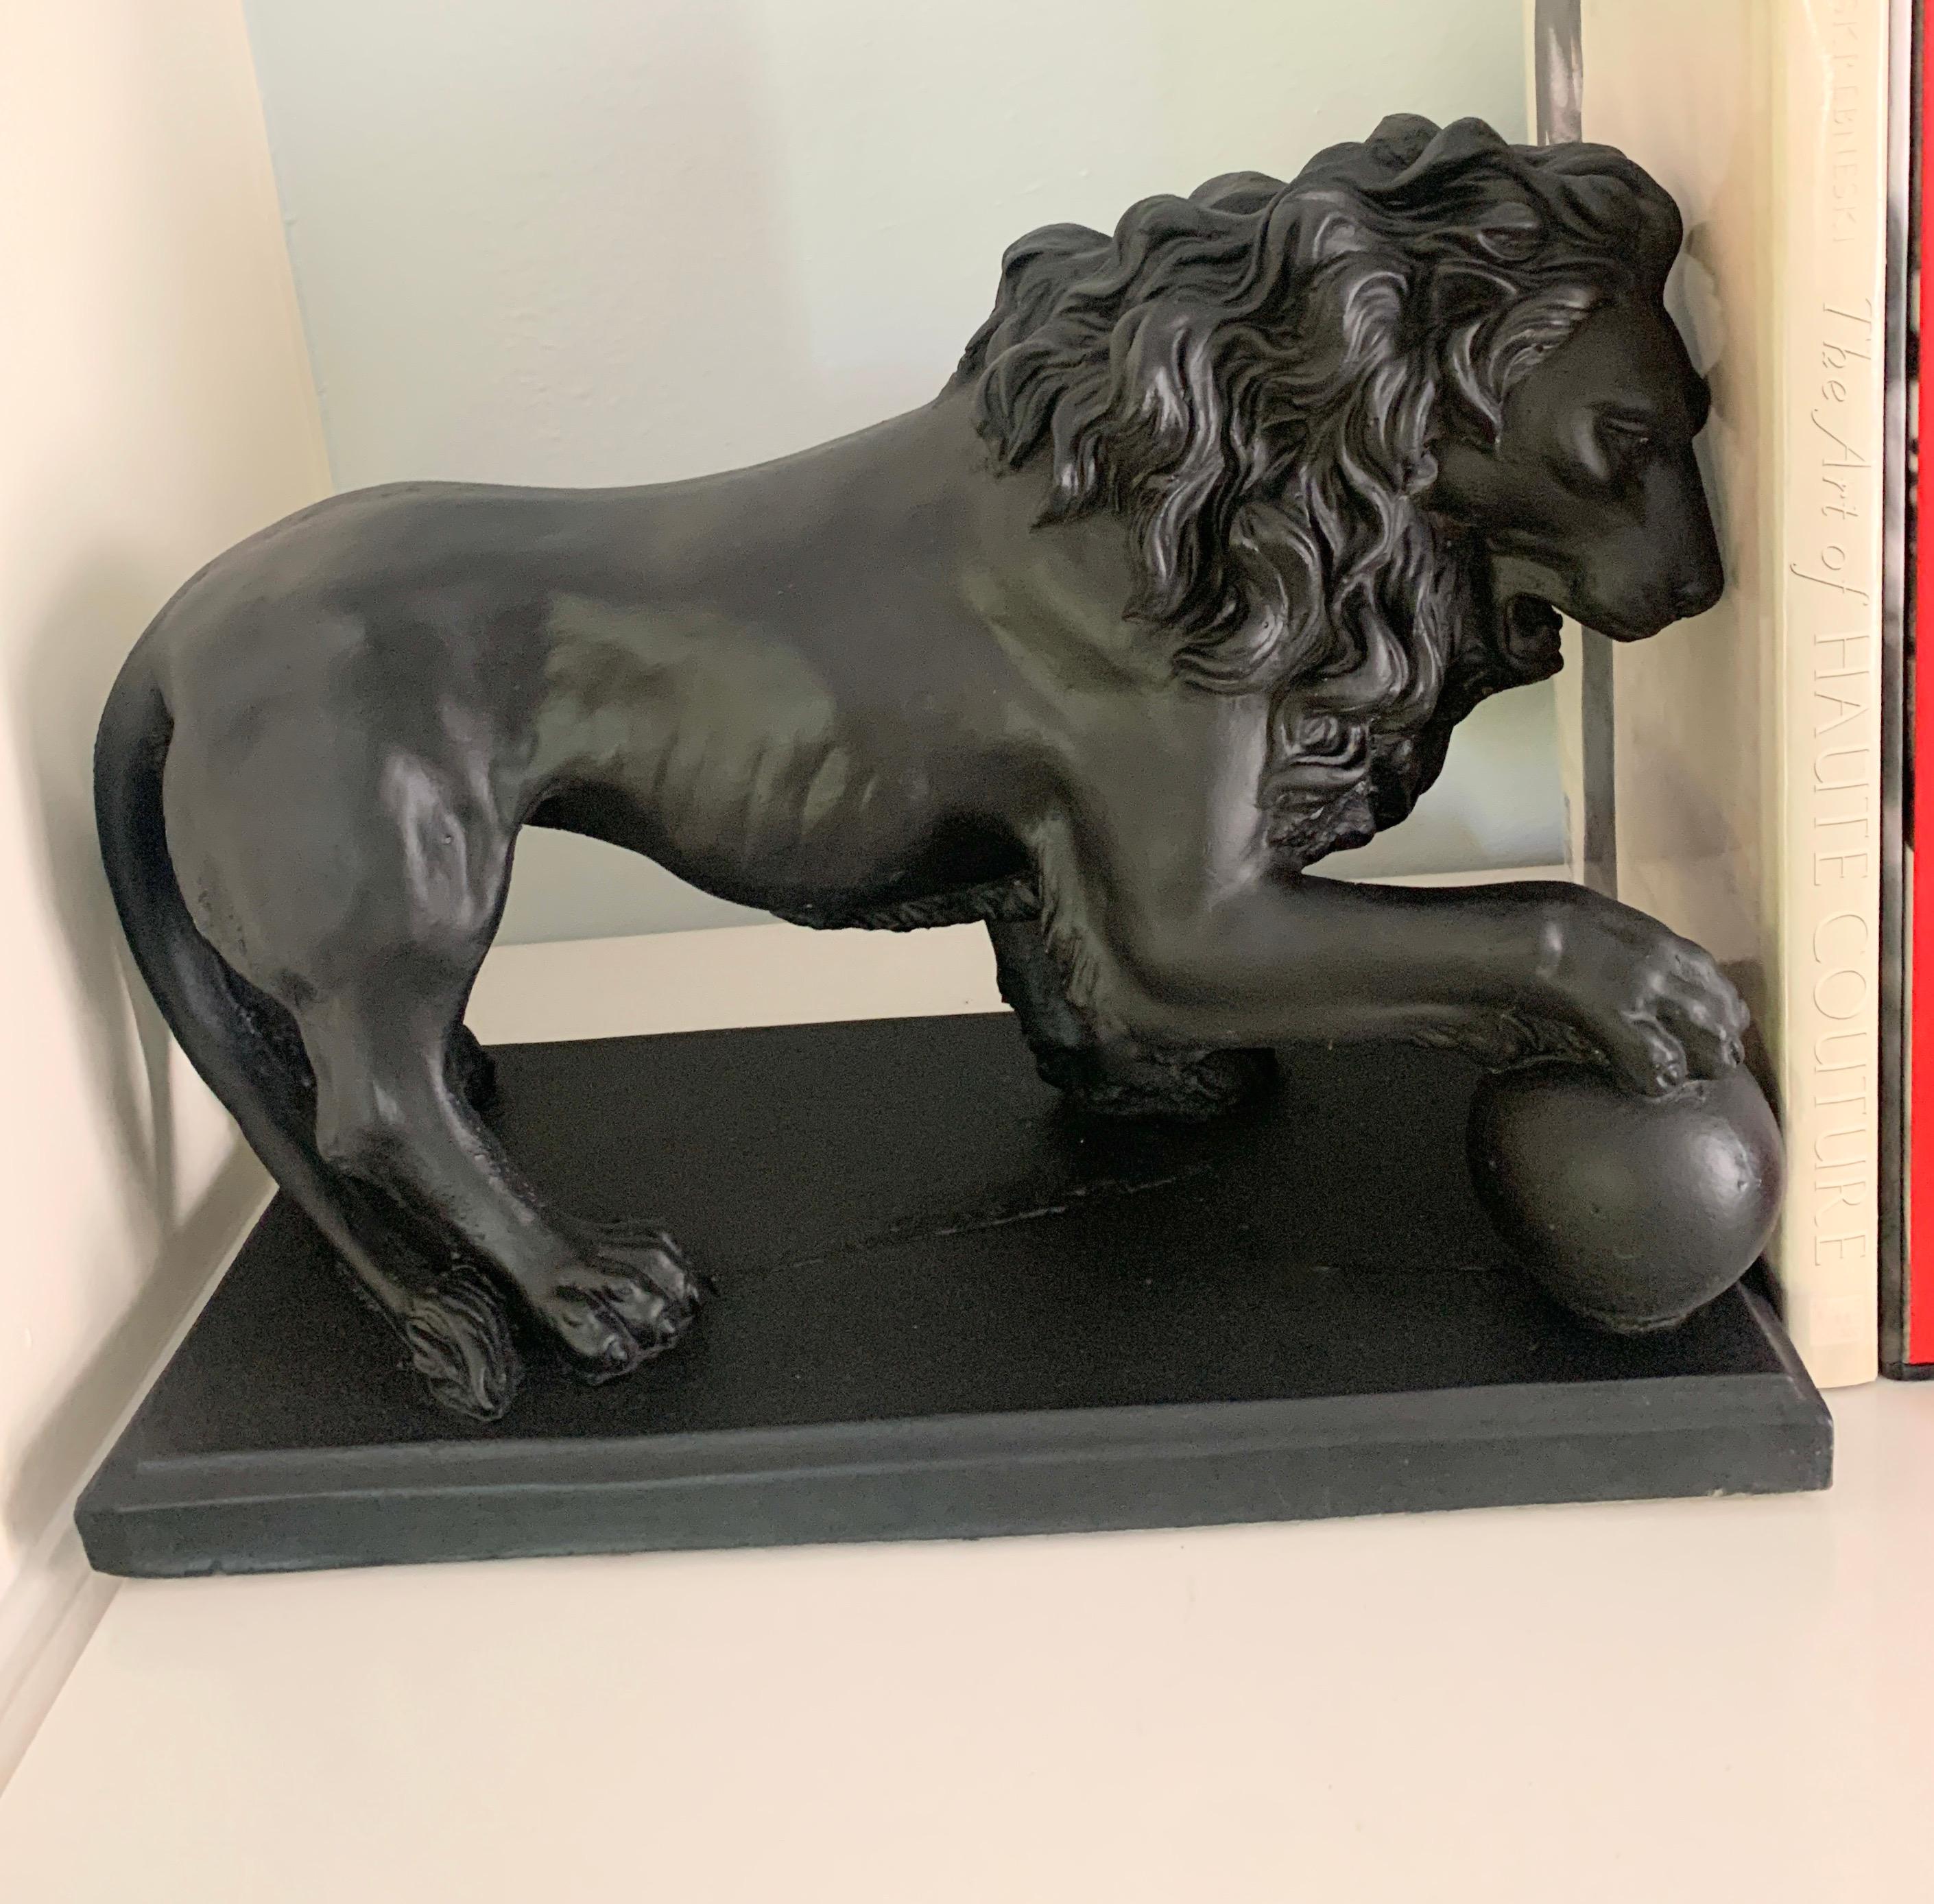 A wonderful and very heavy pair of Lions (37 Pounds ea>)in Black with a ball under foot. The pair are wonderful flanking a fireplace, outdoor garden area or perhaps in the den. They have been repainted black and will hold up well inside our outside.